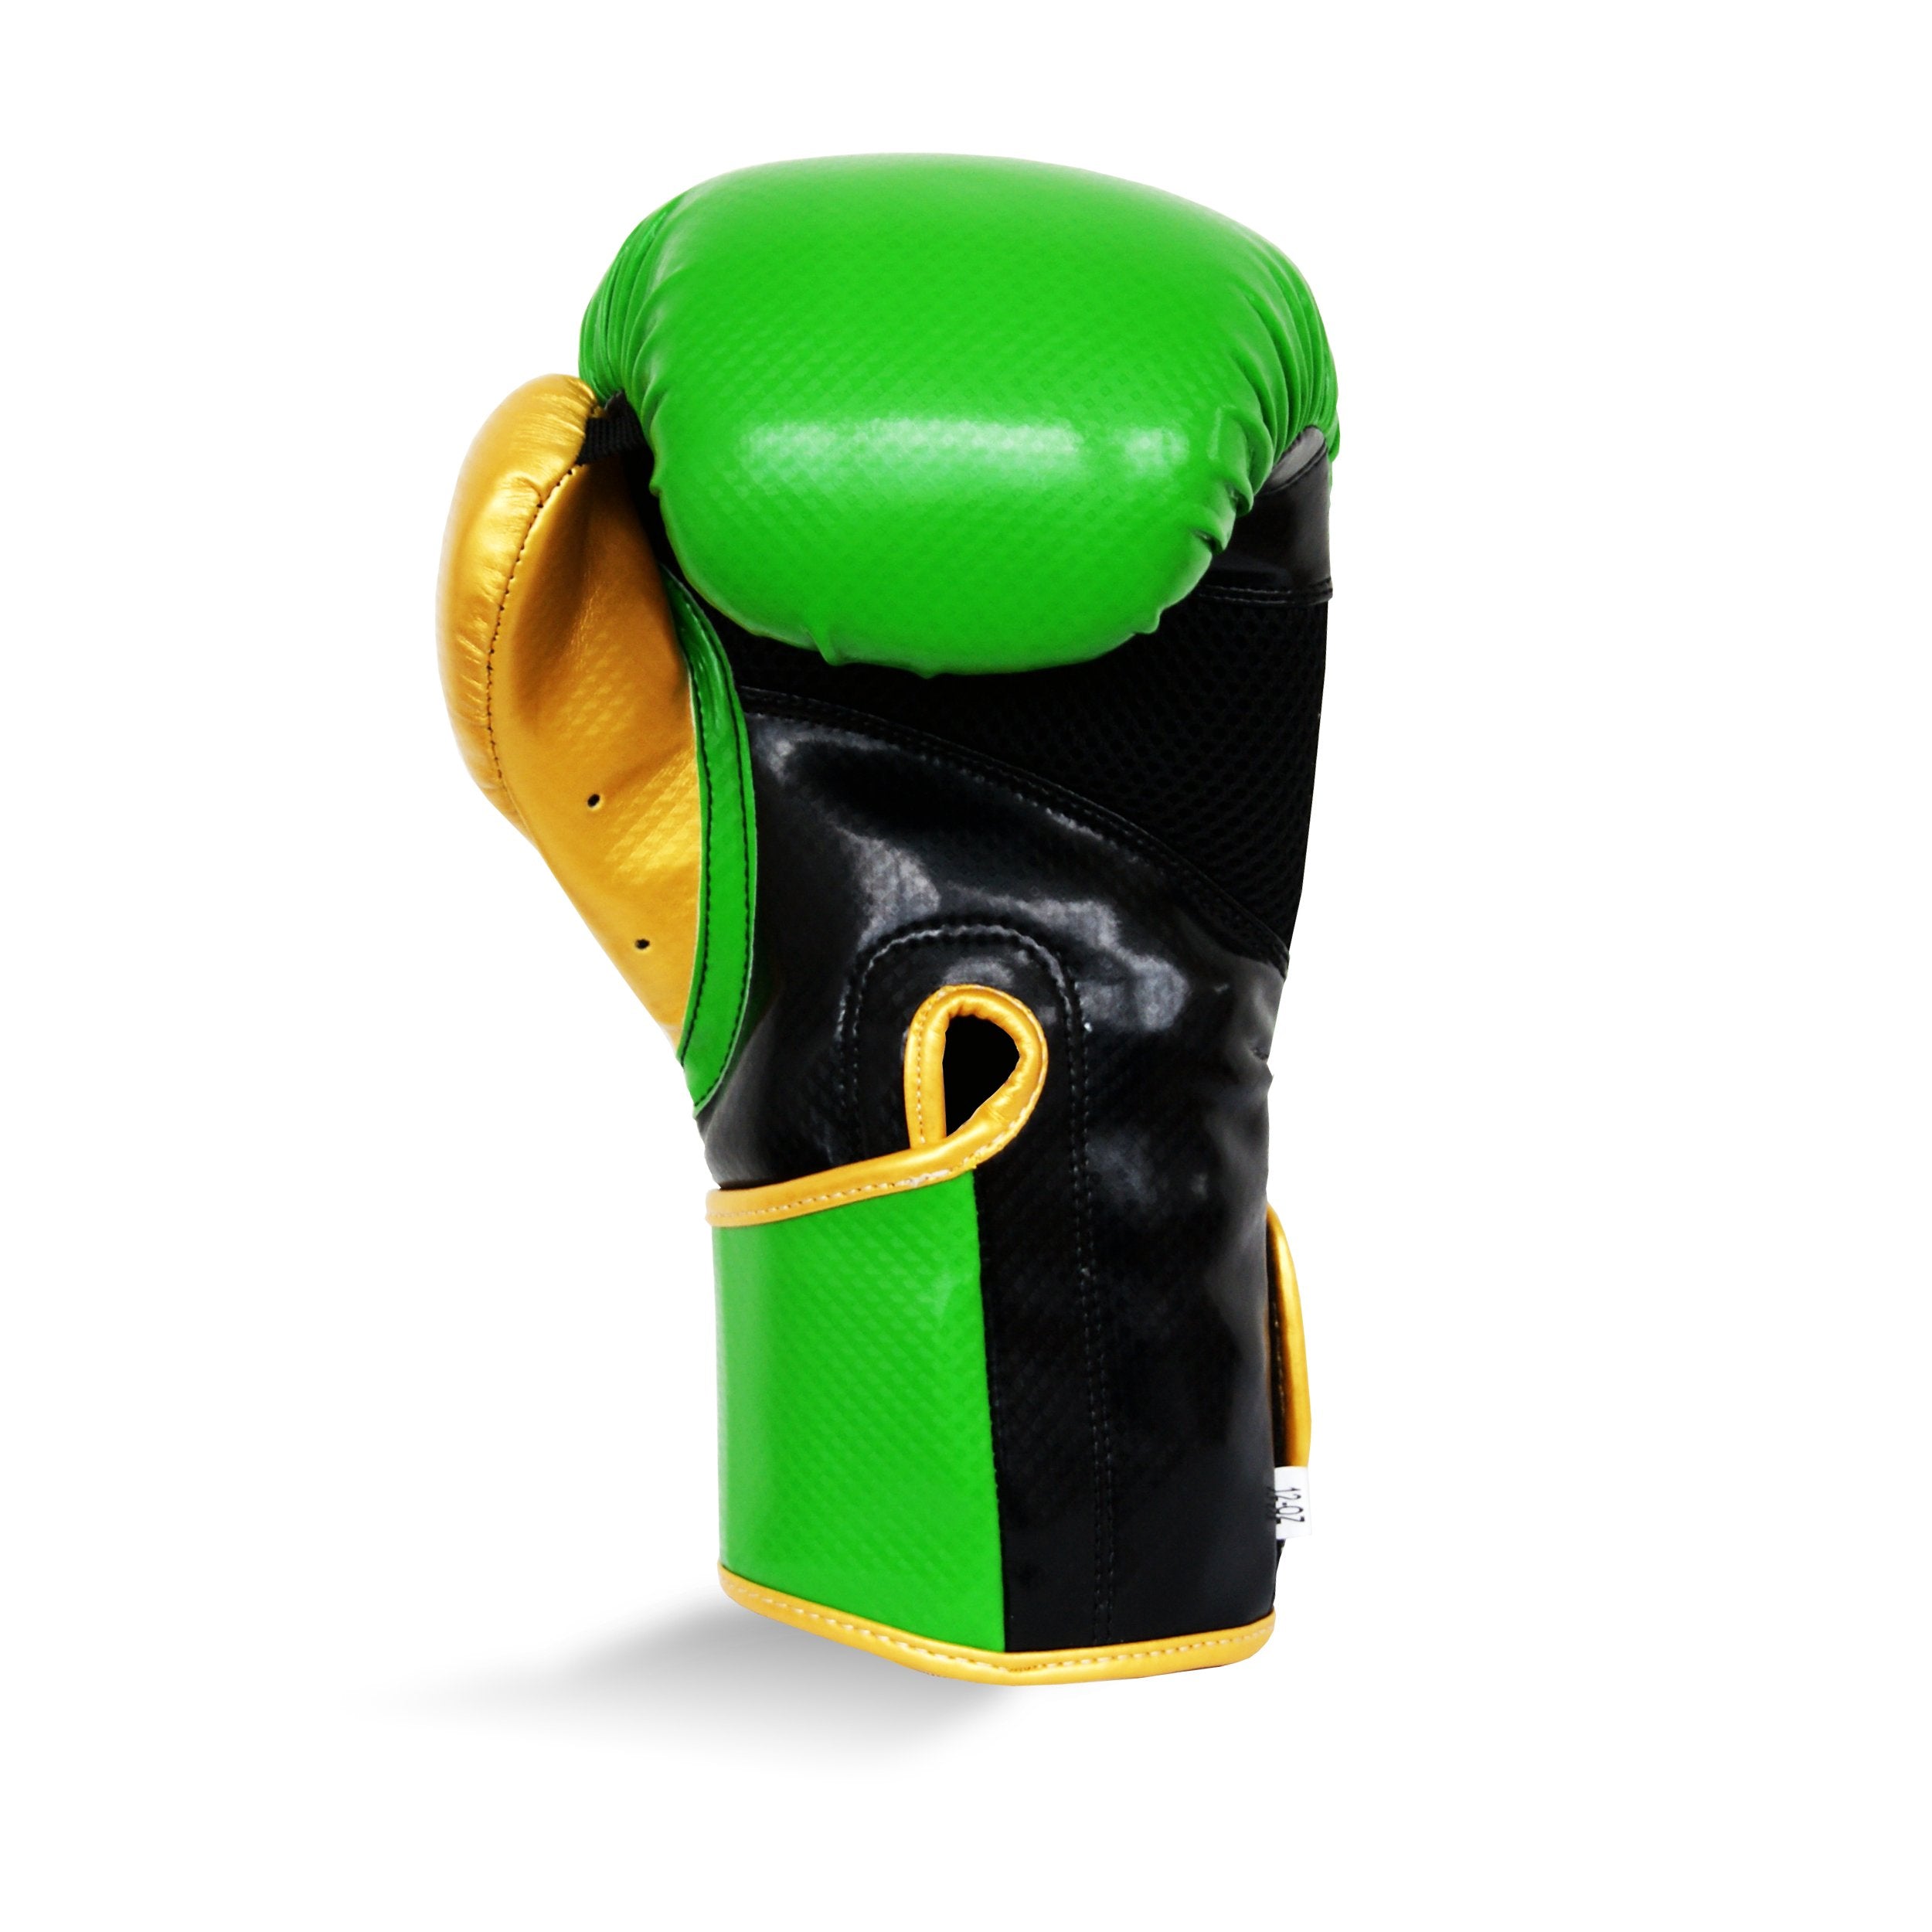 Pro Fitness Synthetic Leather Boxing Glove Metallic Green / Black / Gold